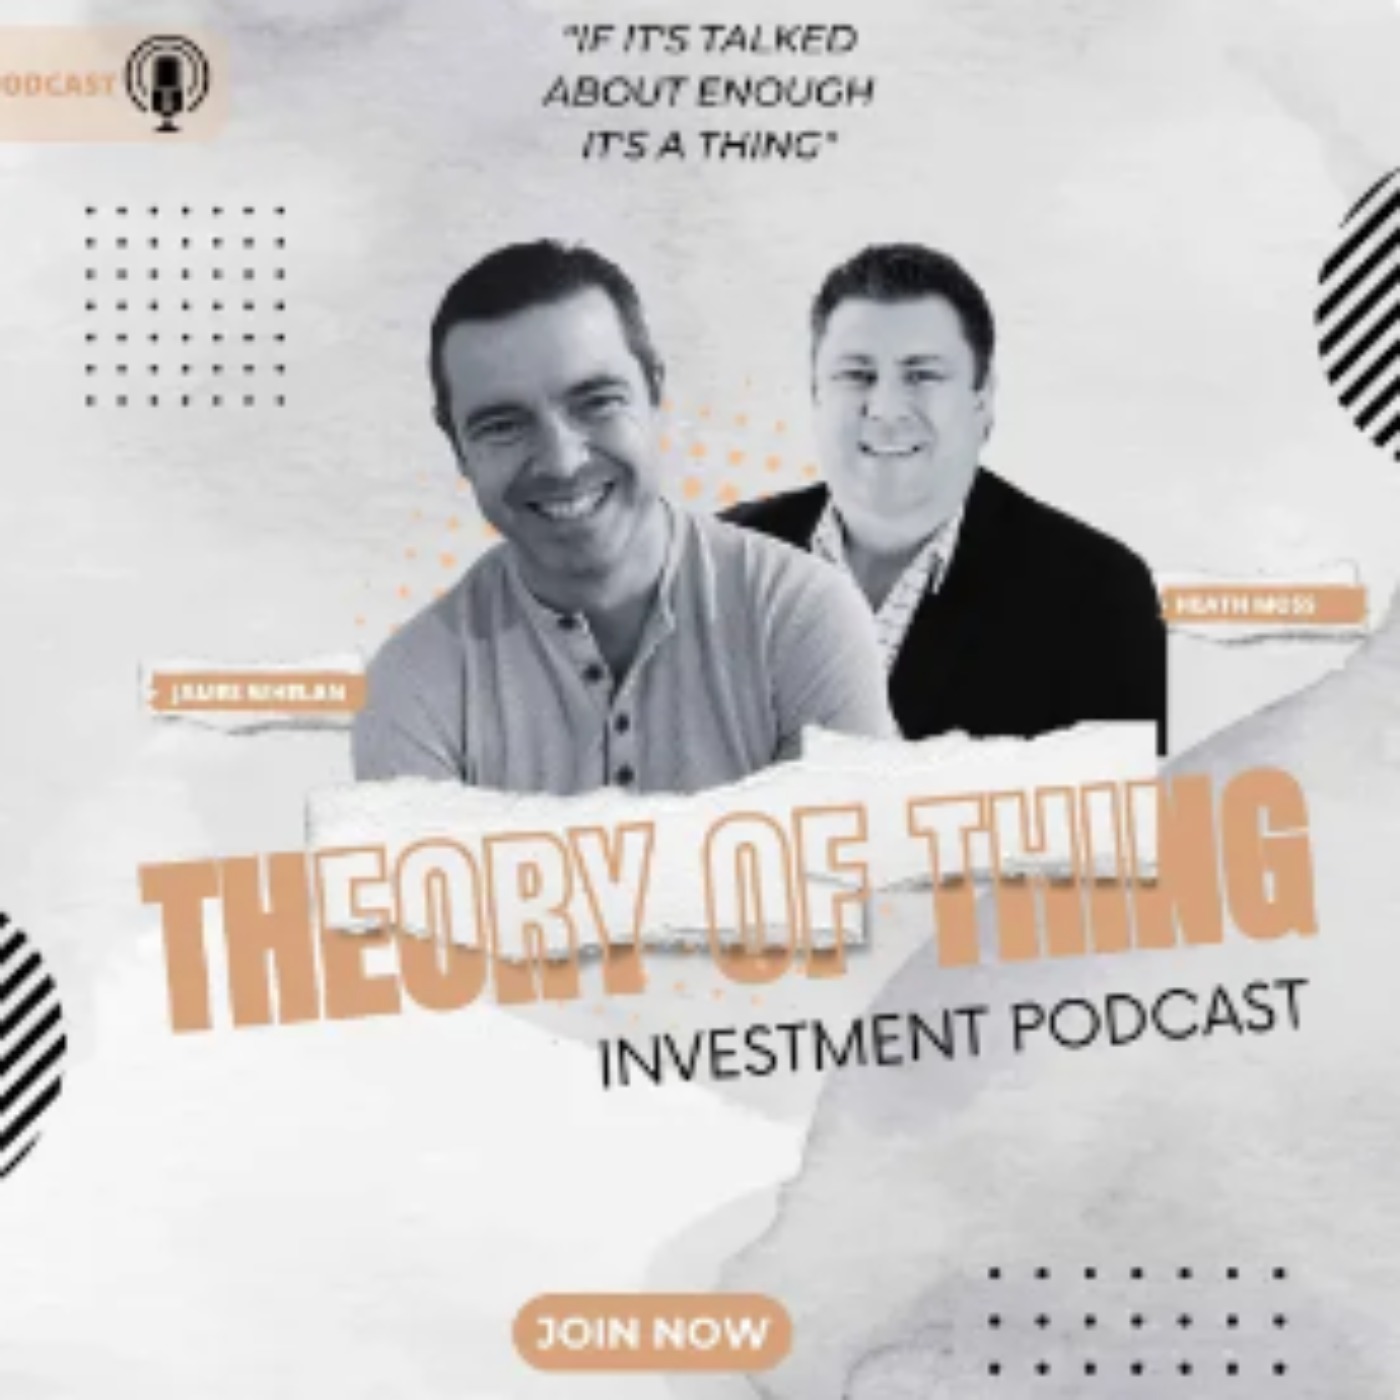 Episode 29: The Theory of Thing Investment Podcast